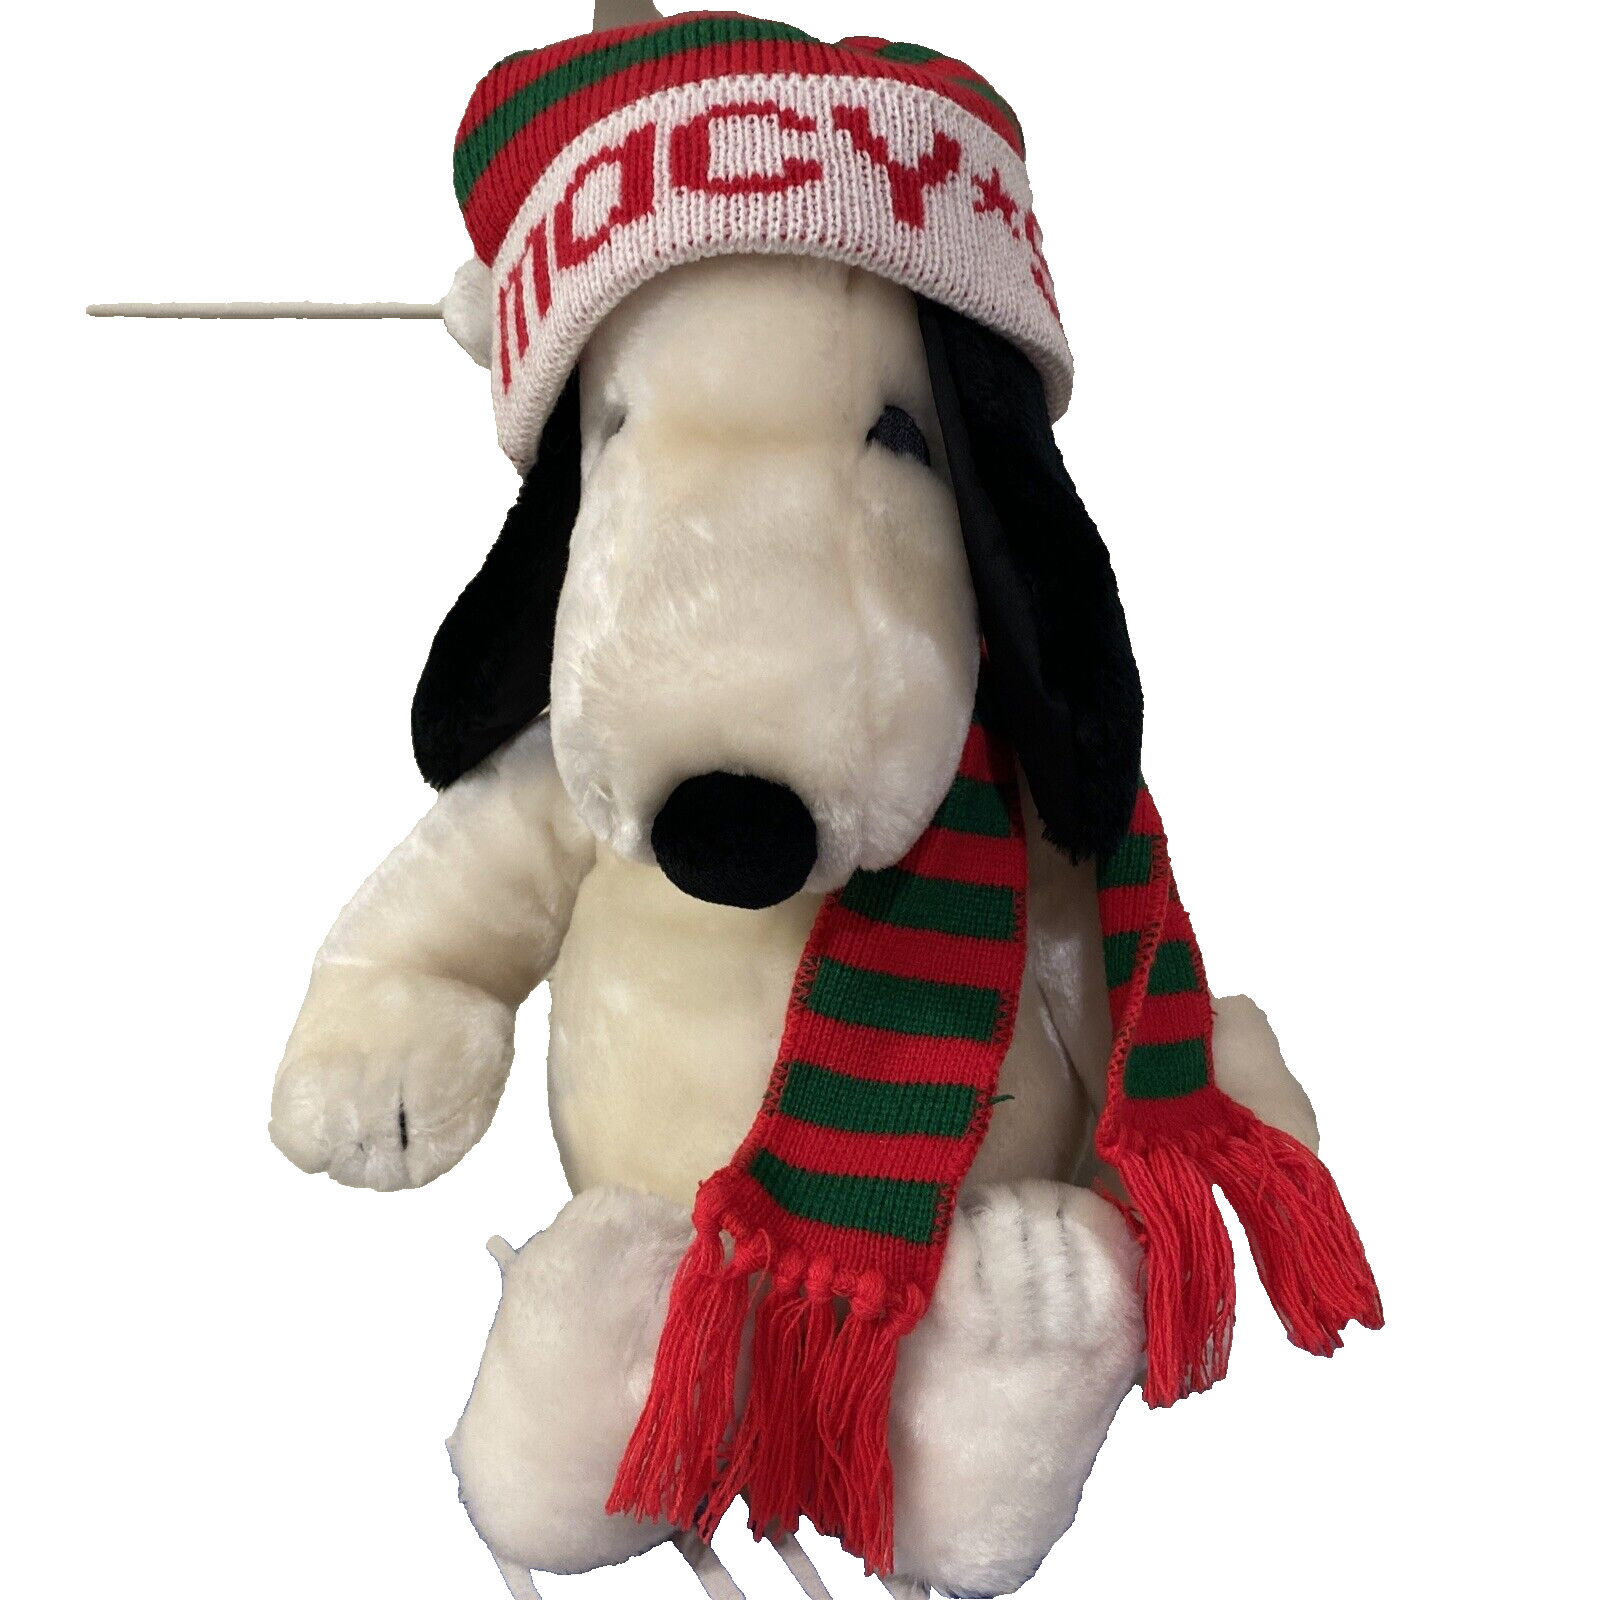 Vintage 1960's Macy's Snoopy Christmas Stuffed Animal Plush 20” Collectible Cute